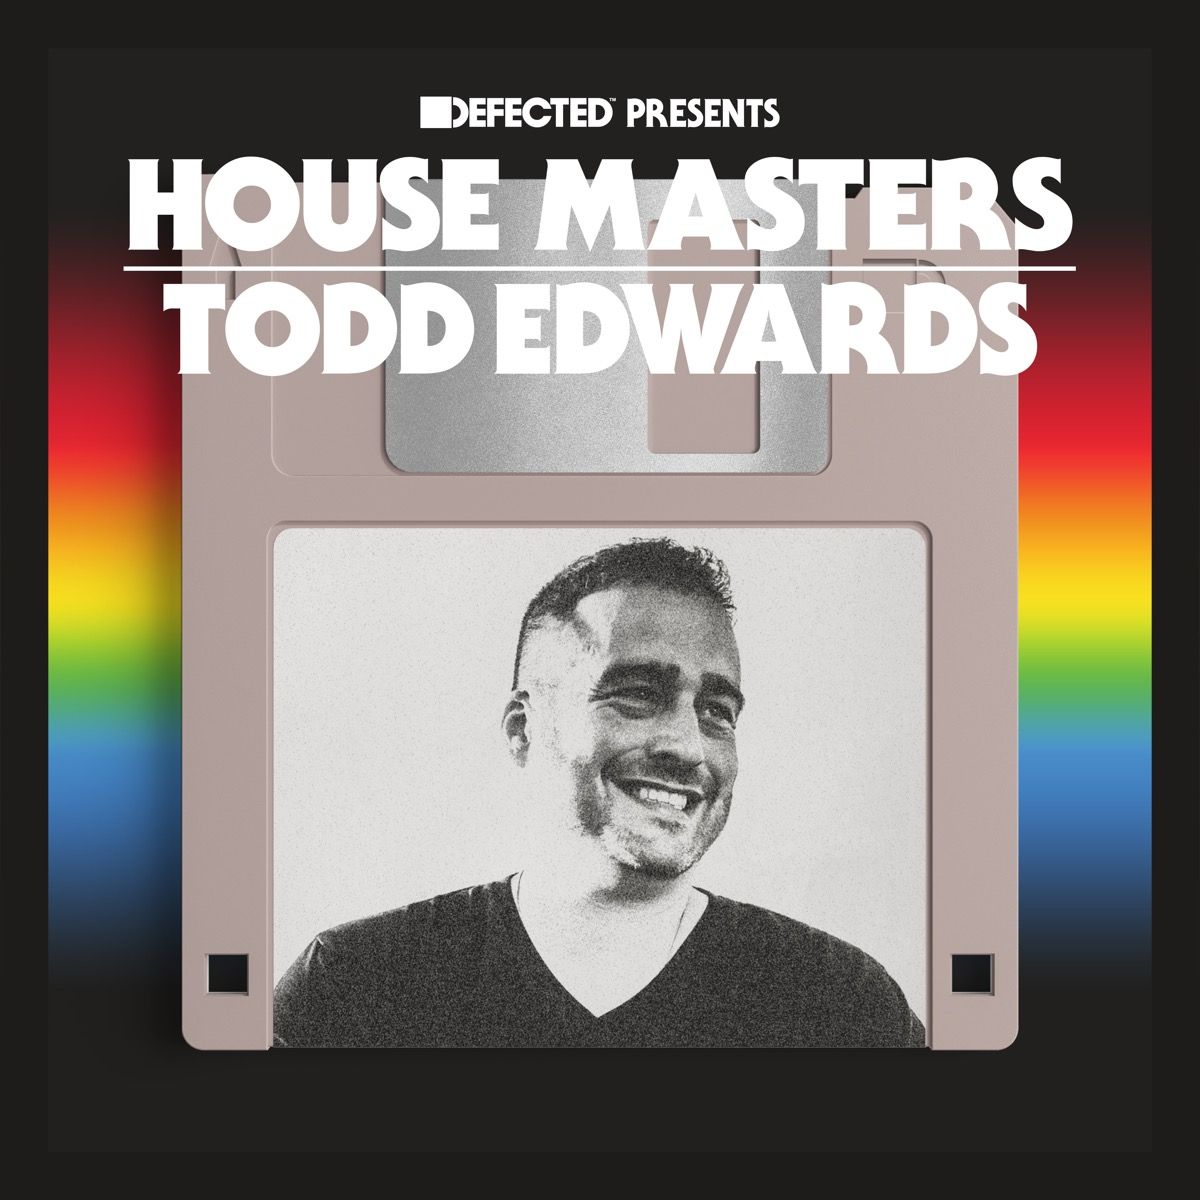 image cover: Defected Presents House Masters - Todd Edwards